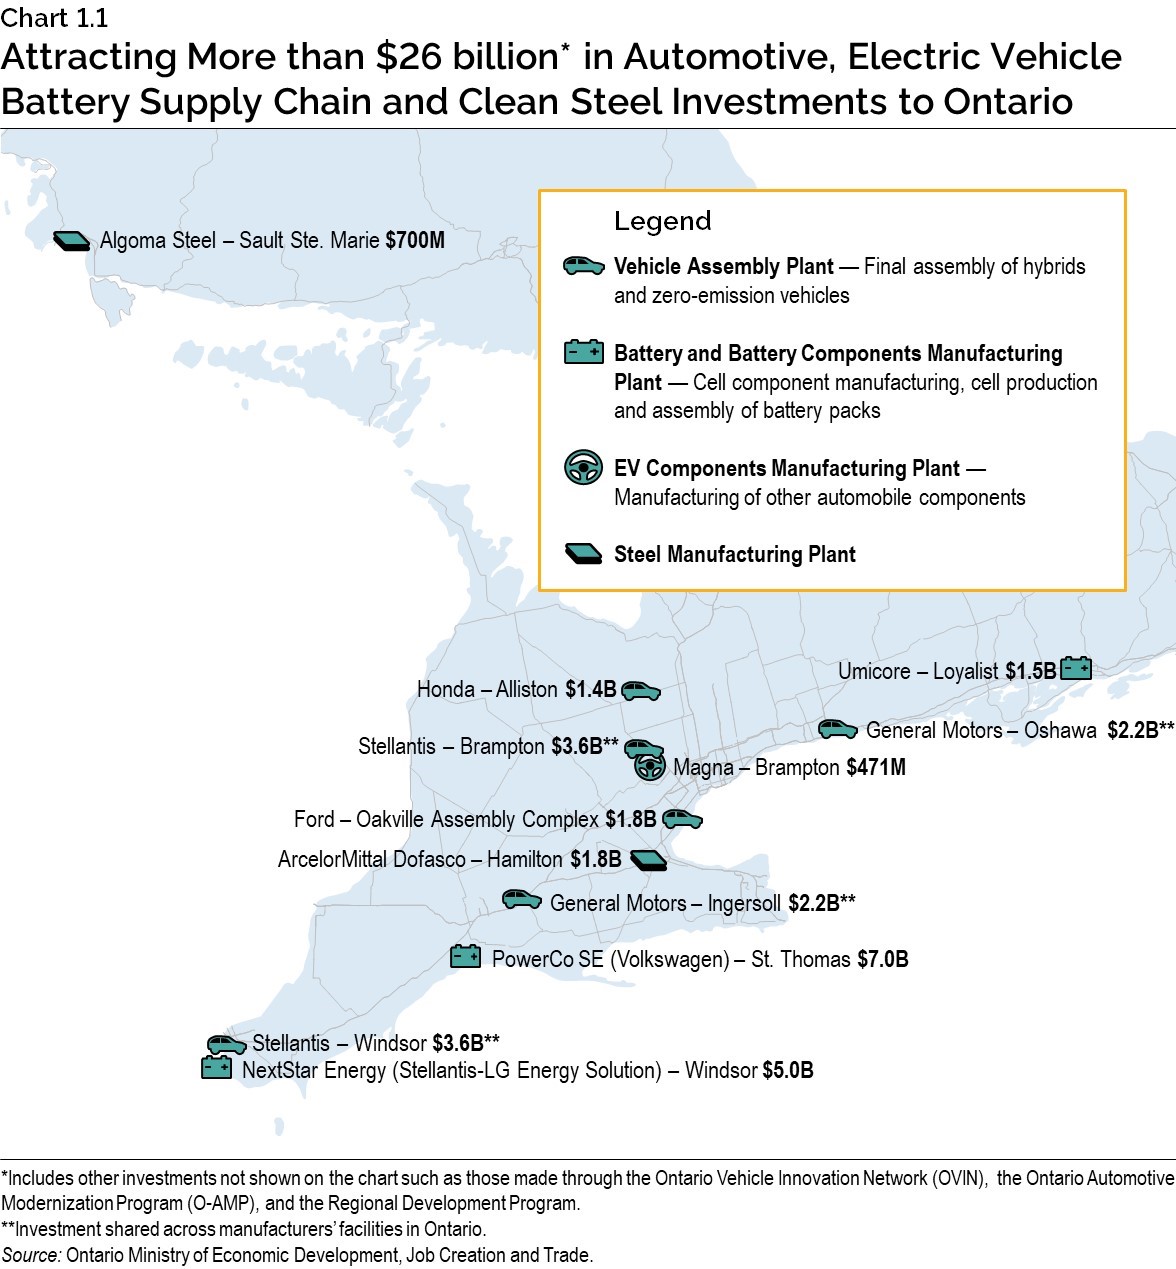 Chart 1.1: Attracting More than $26 billion in Automotive, Electric Vehicle Battery Supply Chain and Clean Steel Investments to Ontario